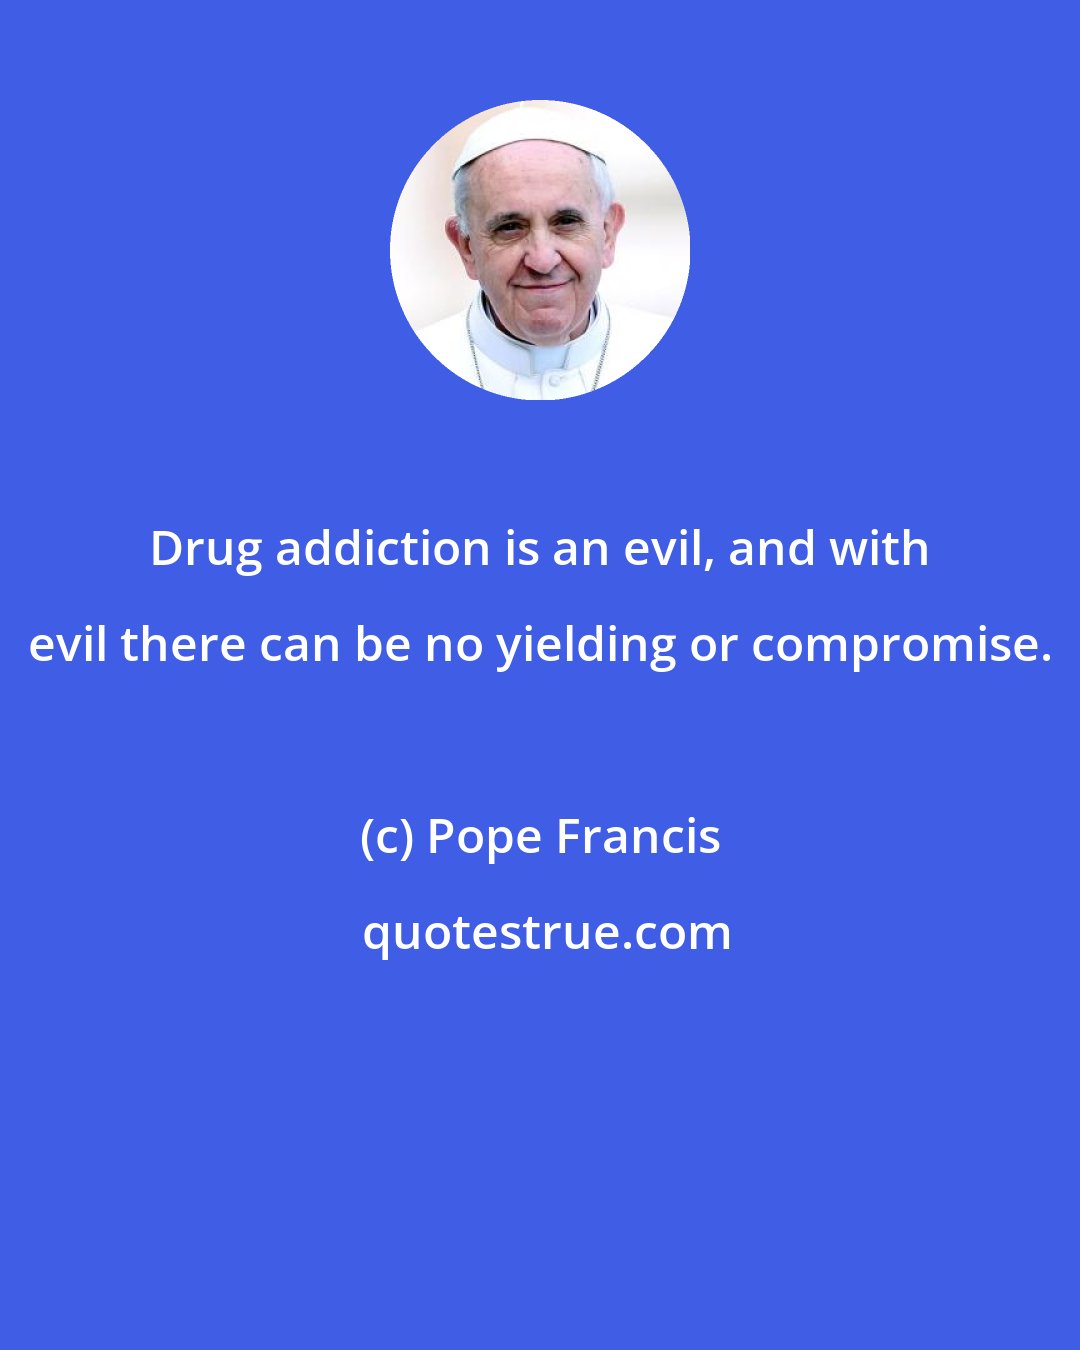 Pope Francis: Drug addiction is an evil, and with evil there can be no yielding or compromise.